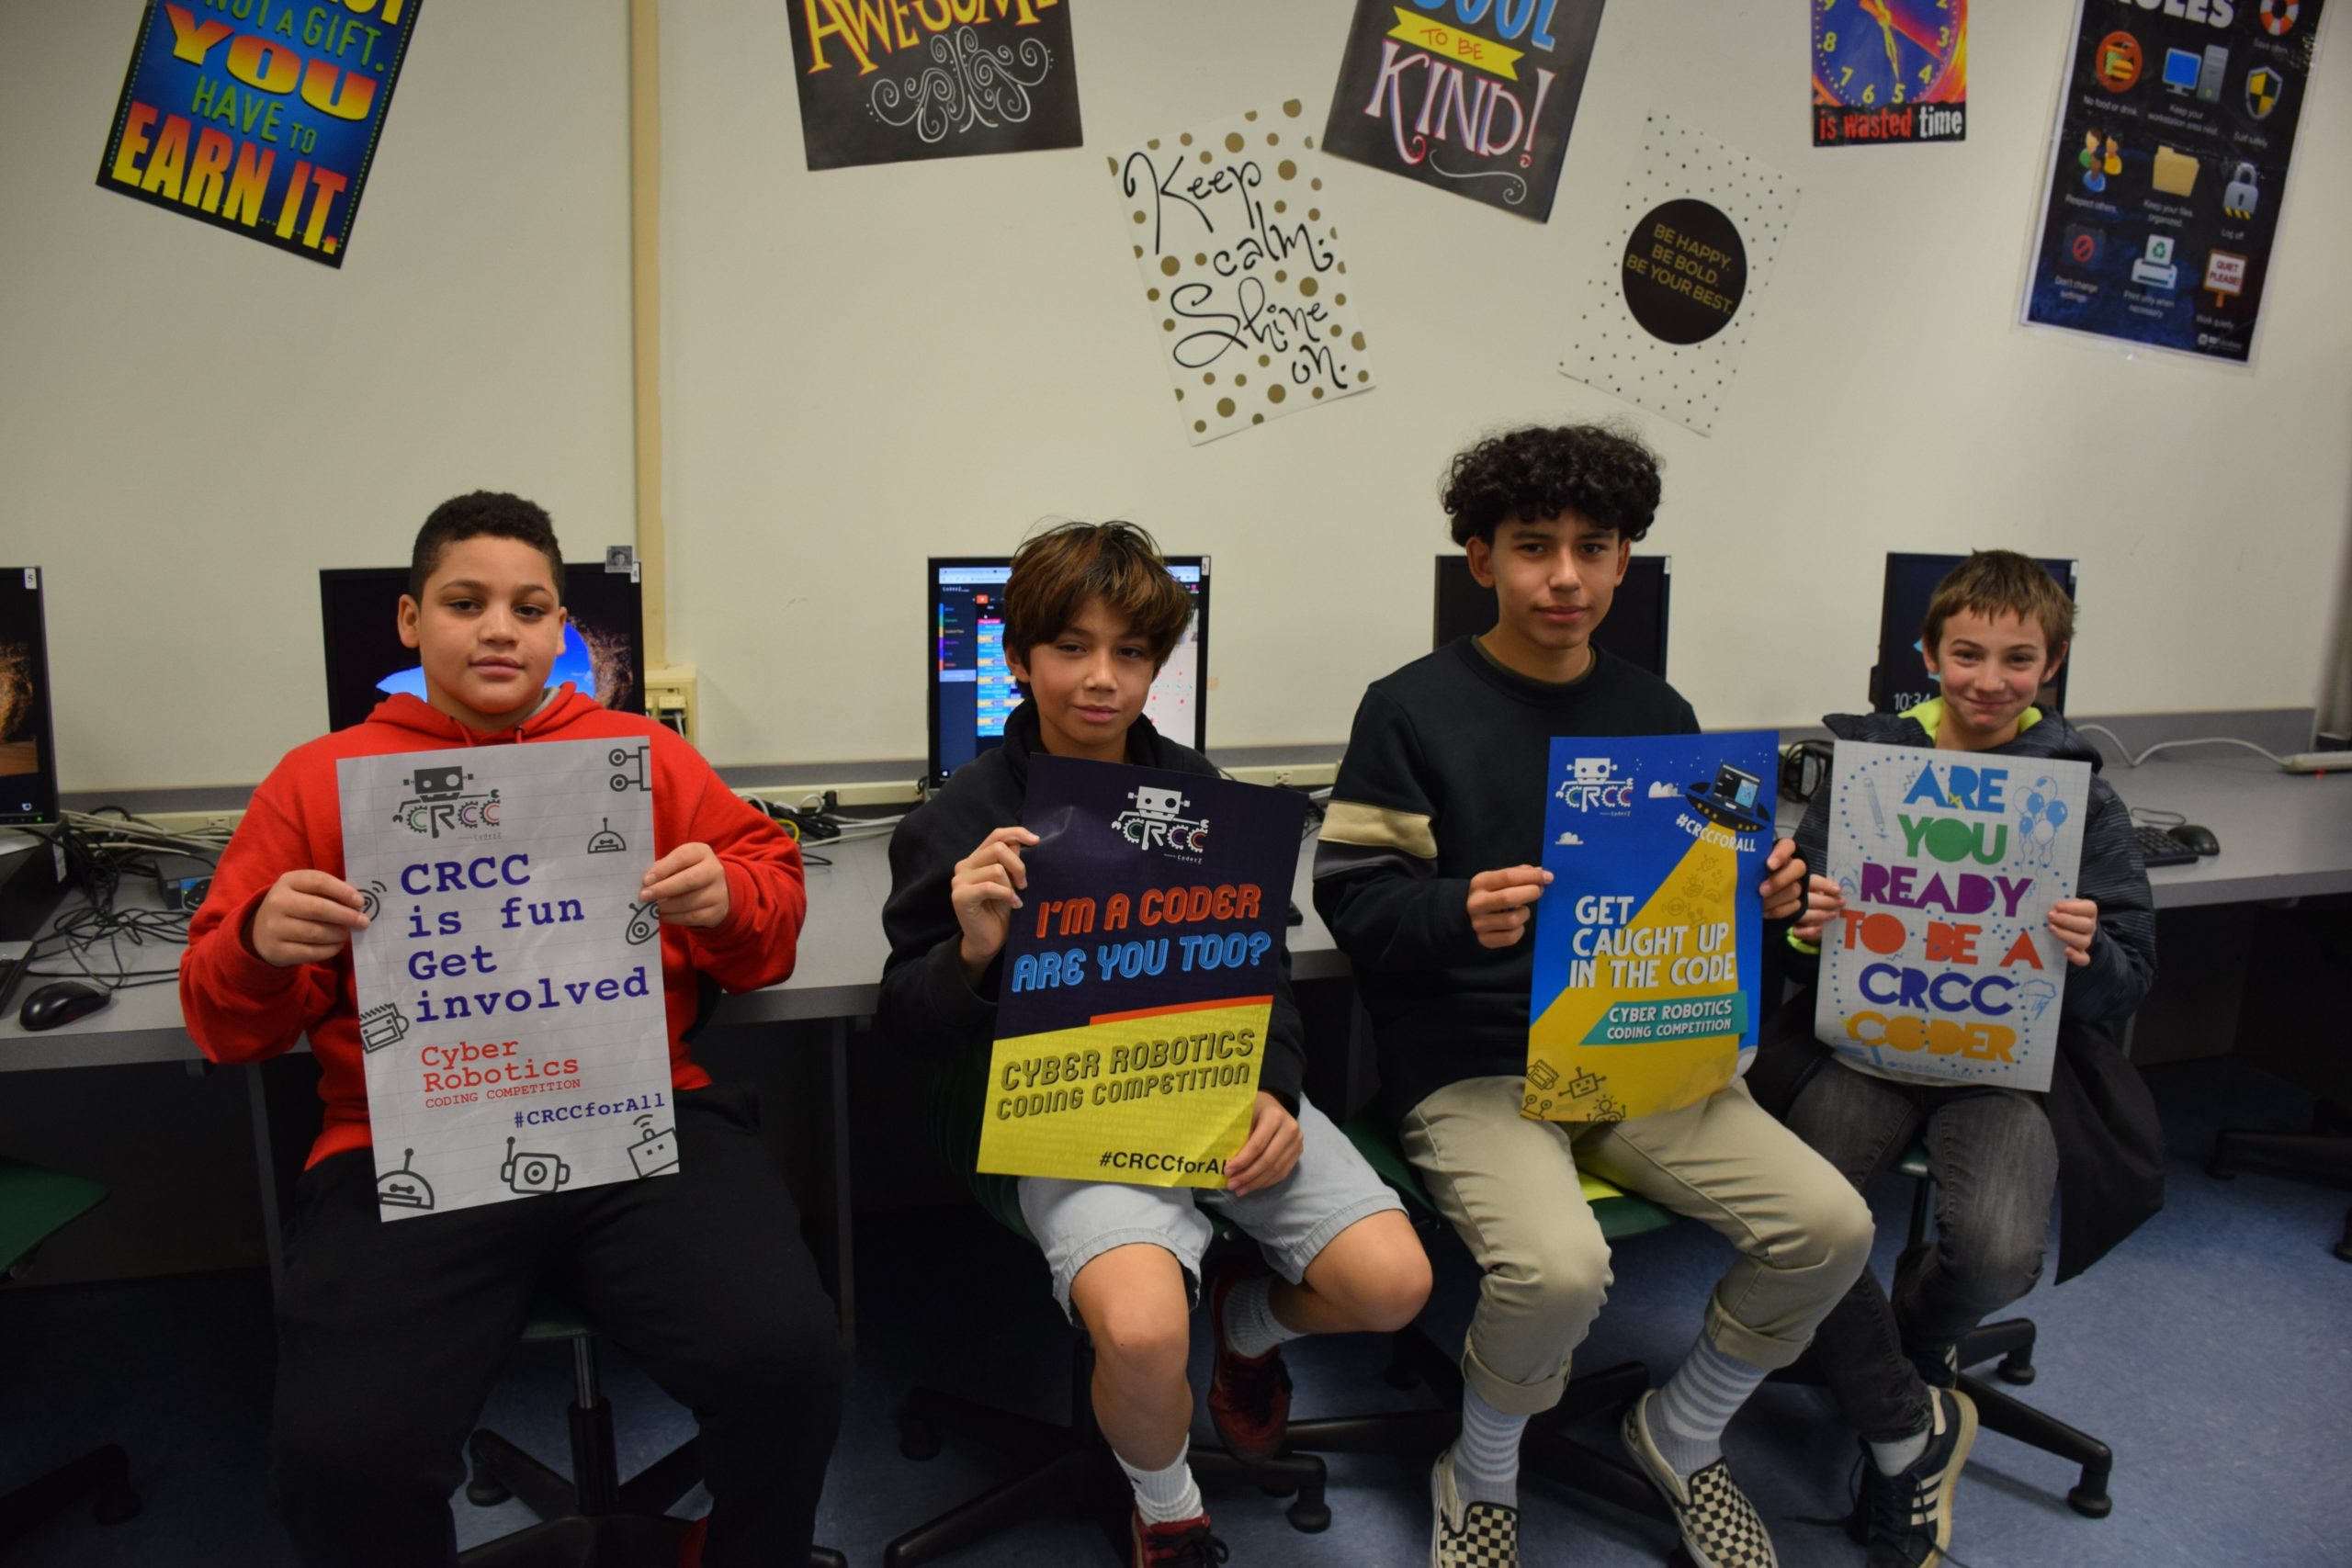 Southampton Intermediate School students, from left, Dyson Smith, Bryan Rosales, Danny Bustamante and Thomas Dunkirk will be representing their school at the CoderZ Cyber Robotics Coding Competition finals on December 13. To earn a spot in the competition, the Southampton seventh and eighth graders, under the direction of teachers Mei-Lynn Guerrero and Michelle Antonucci, competed against 30 schools in several rounds of timed, online coding qualification challenges.